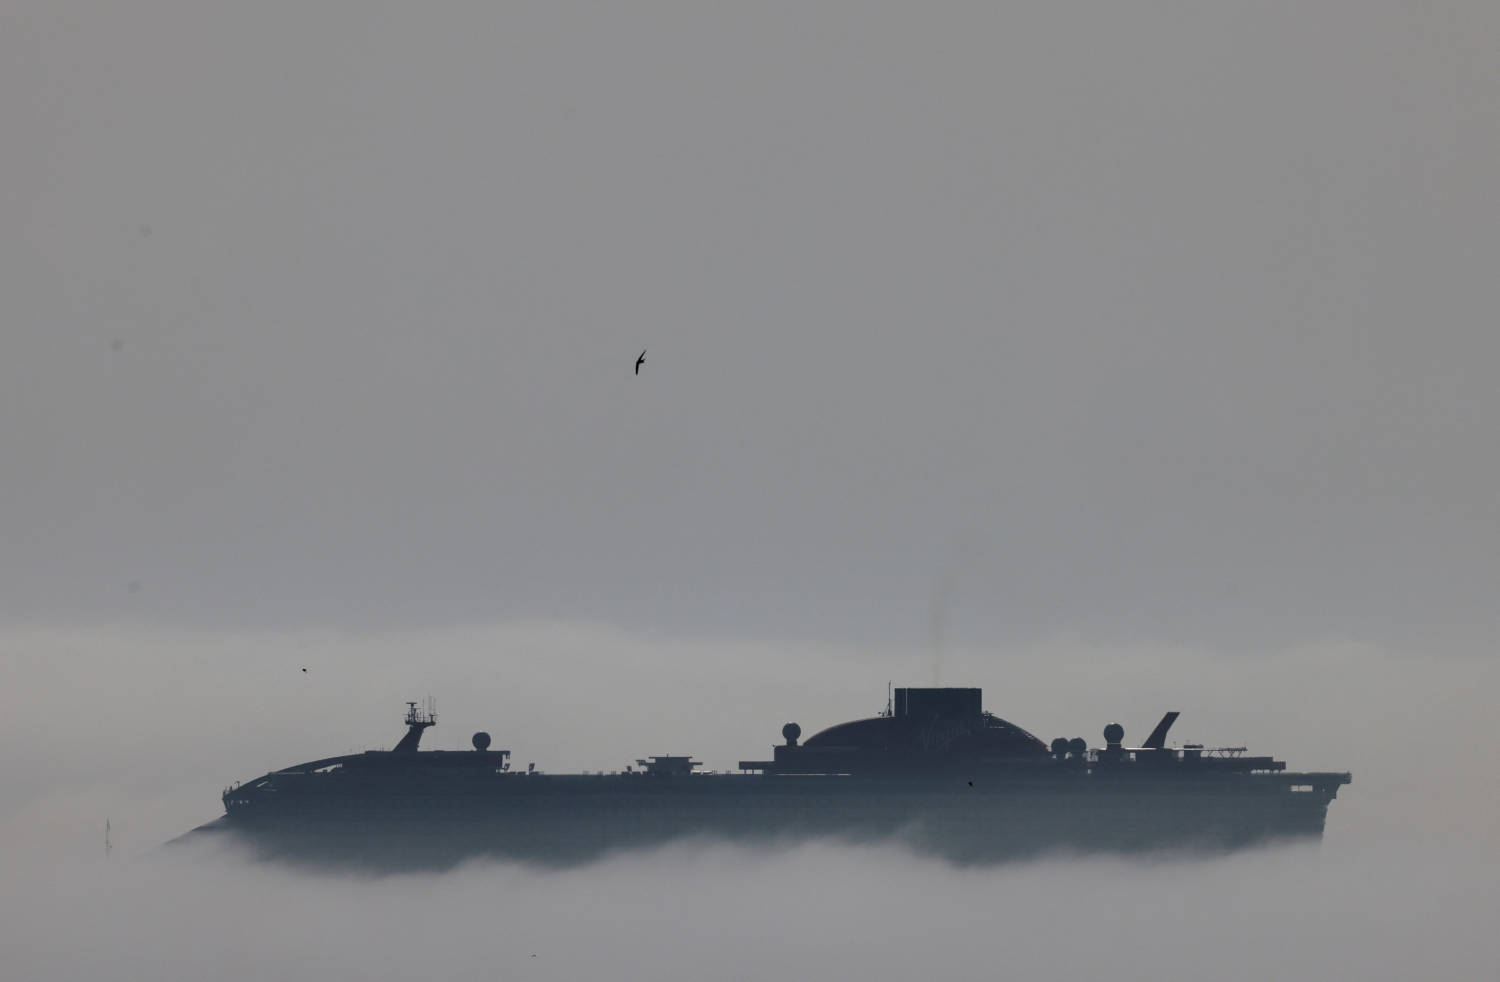 A Cruise Ship Is Seen Through The Fog Outside The Port In Larnaca